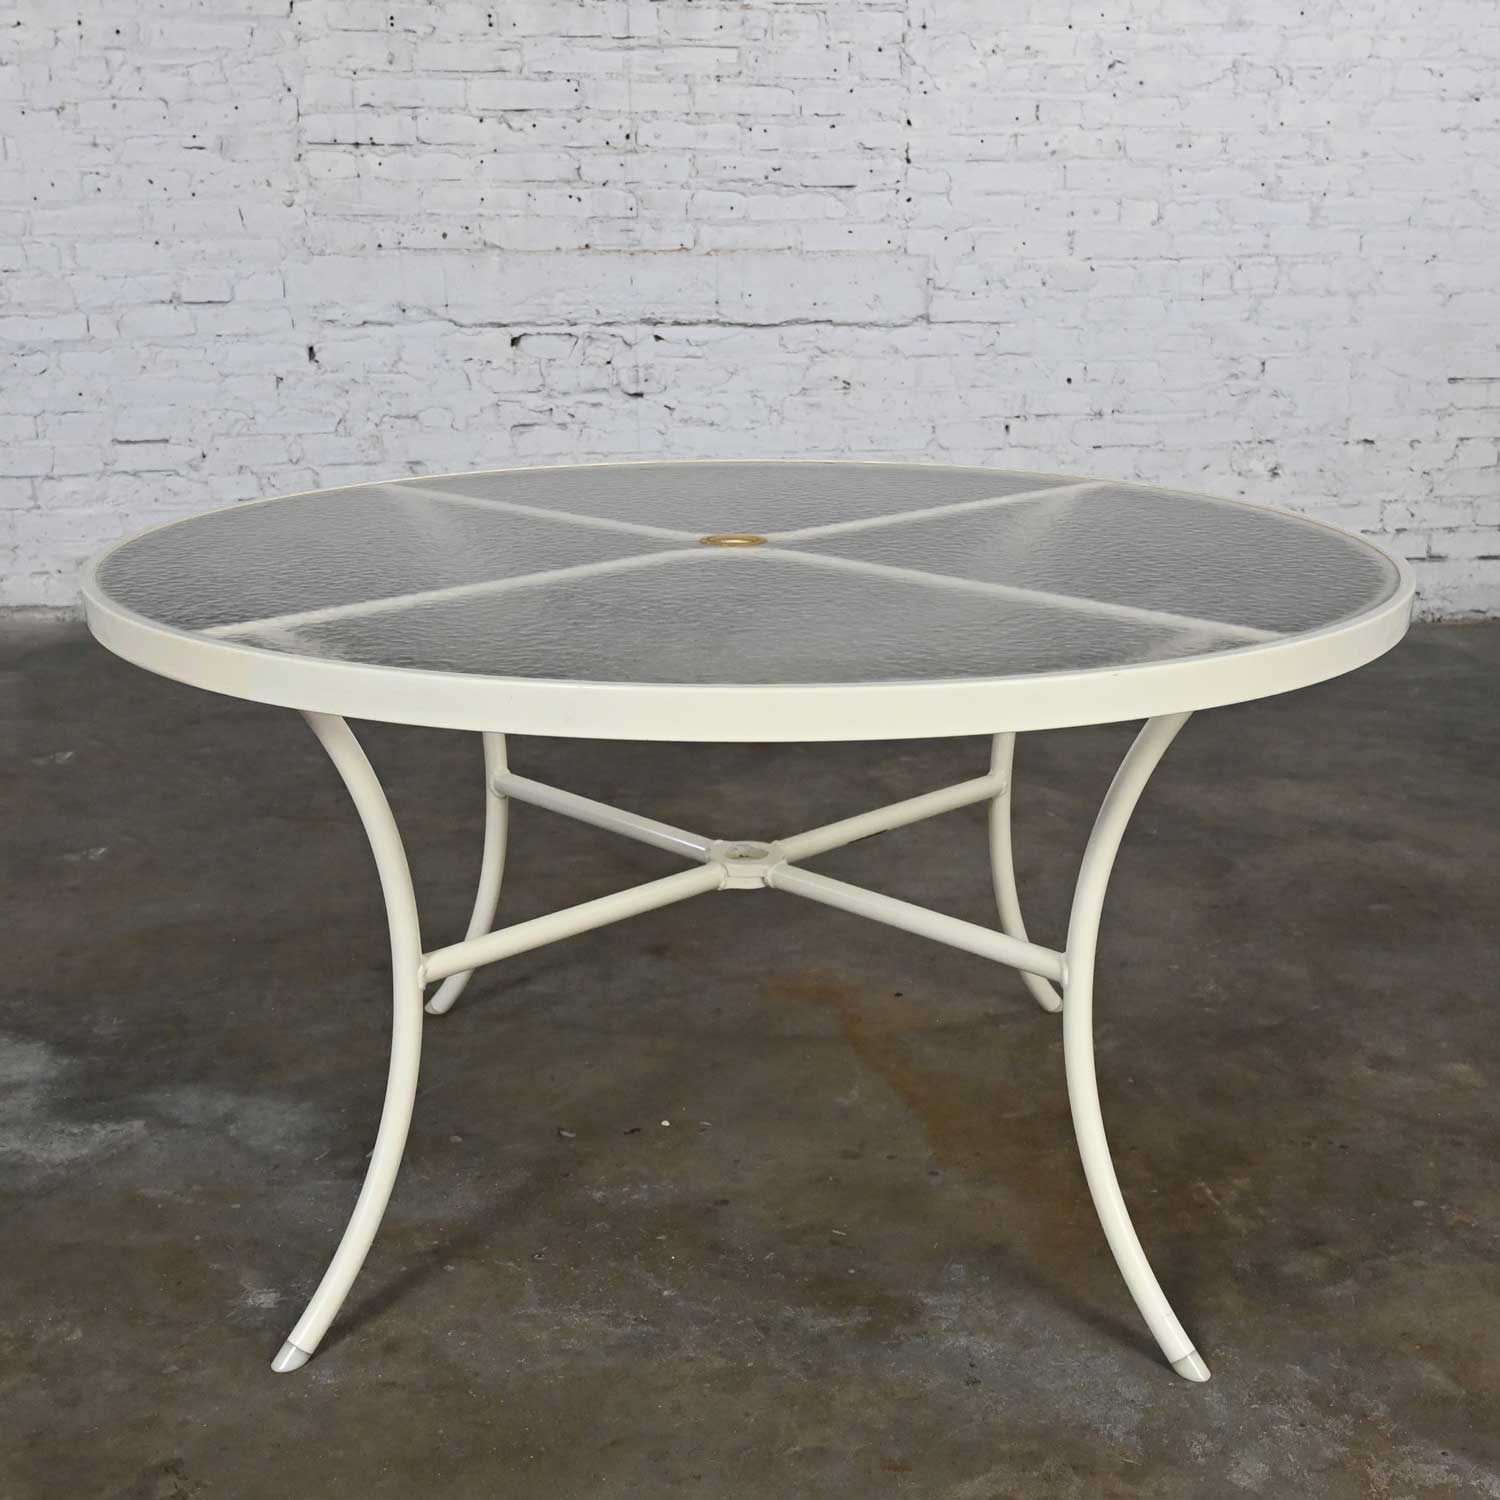 Mid-20th Century MCM Tropitone Outdoor Table with Curved Legs & Round Dimpled Acrylic Top